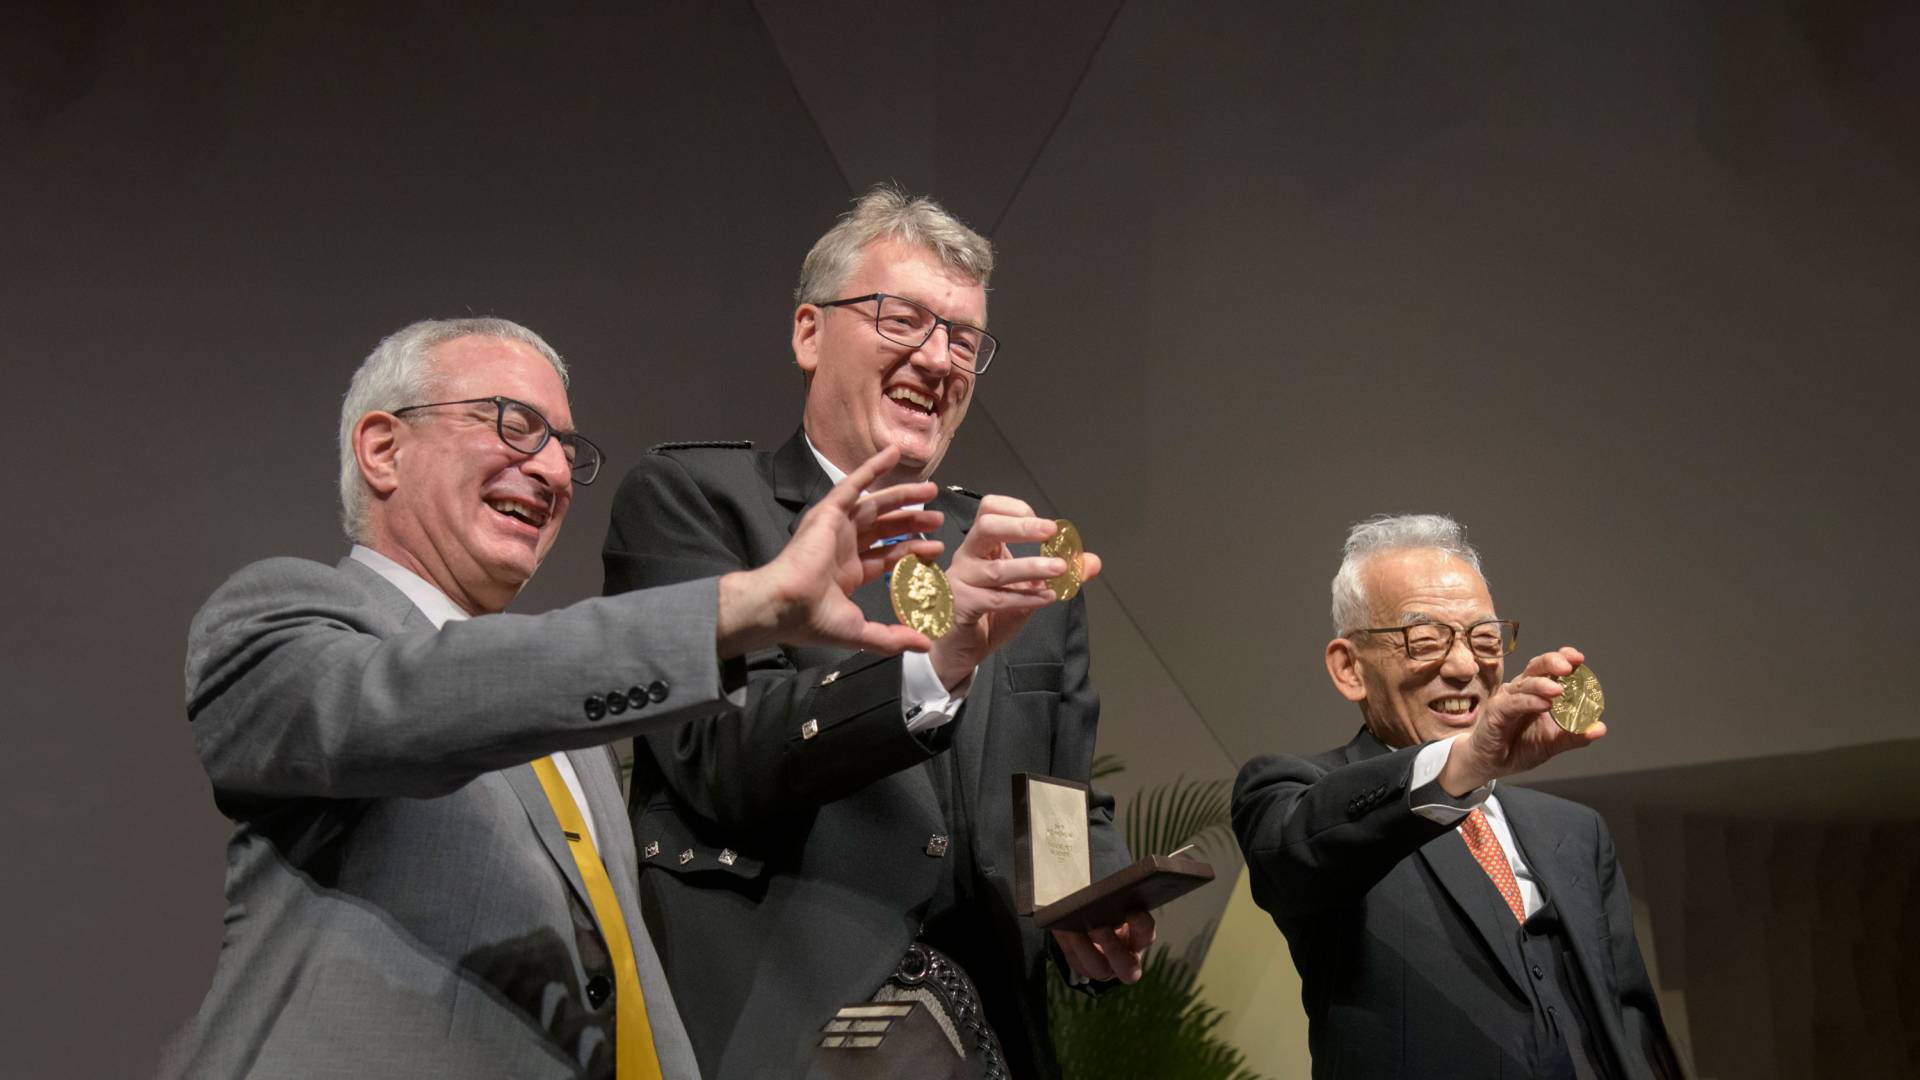 Angrist, MacMillan and Manabe hold up their newly-presented Nobel medals